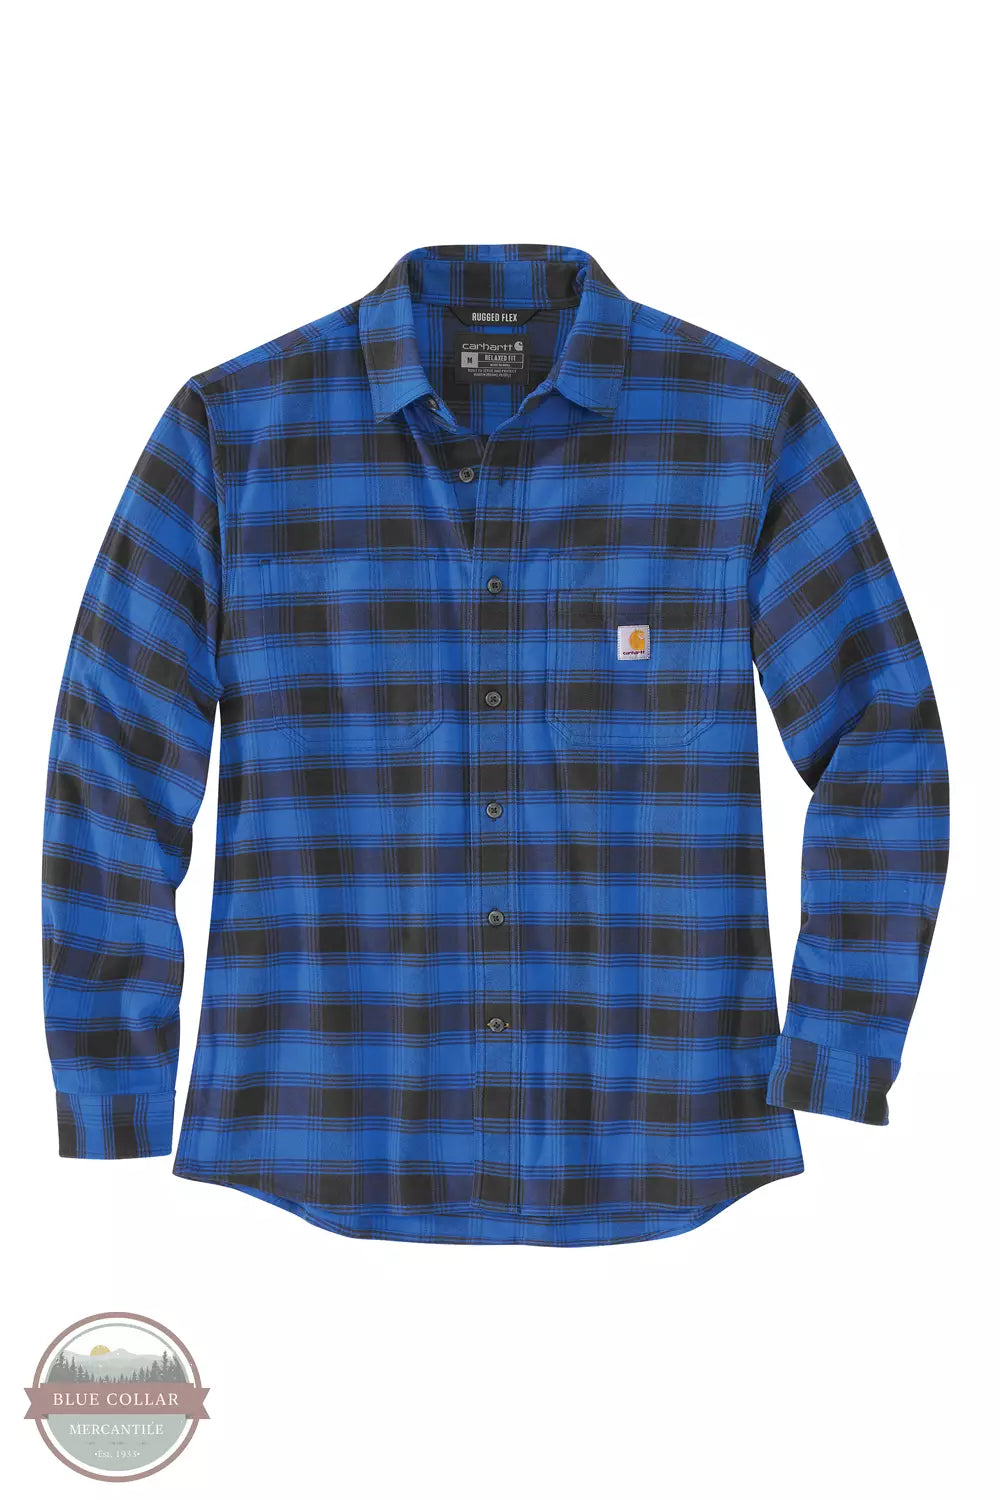 Carhartt 105945 Rugged Flex Relaxed Fit Midweight Flannel Button Down Long Sleeve Shirt in Plaid Glass Blue Front View